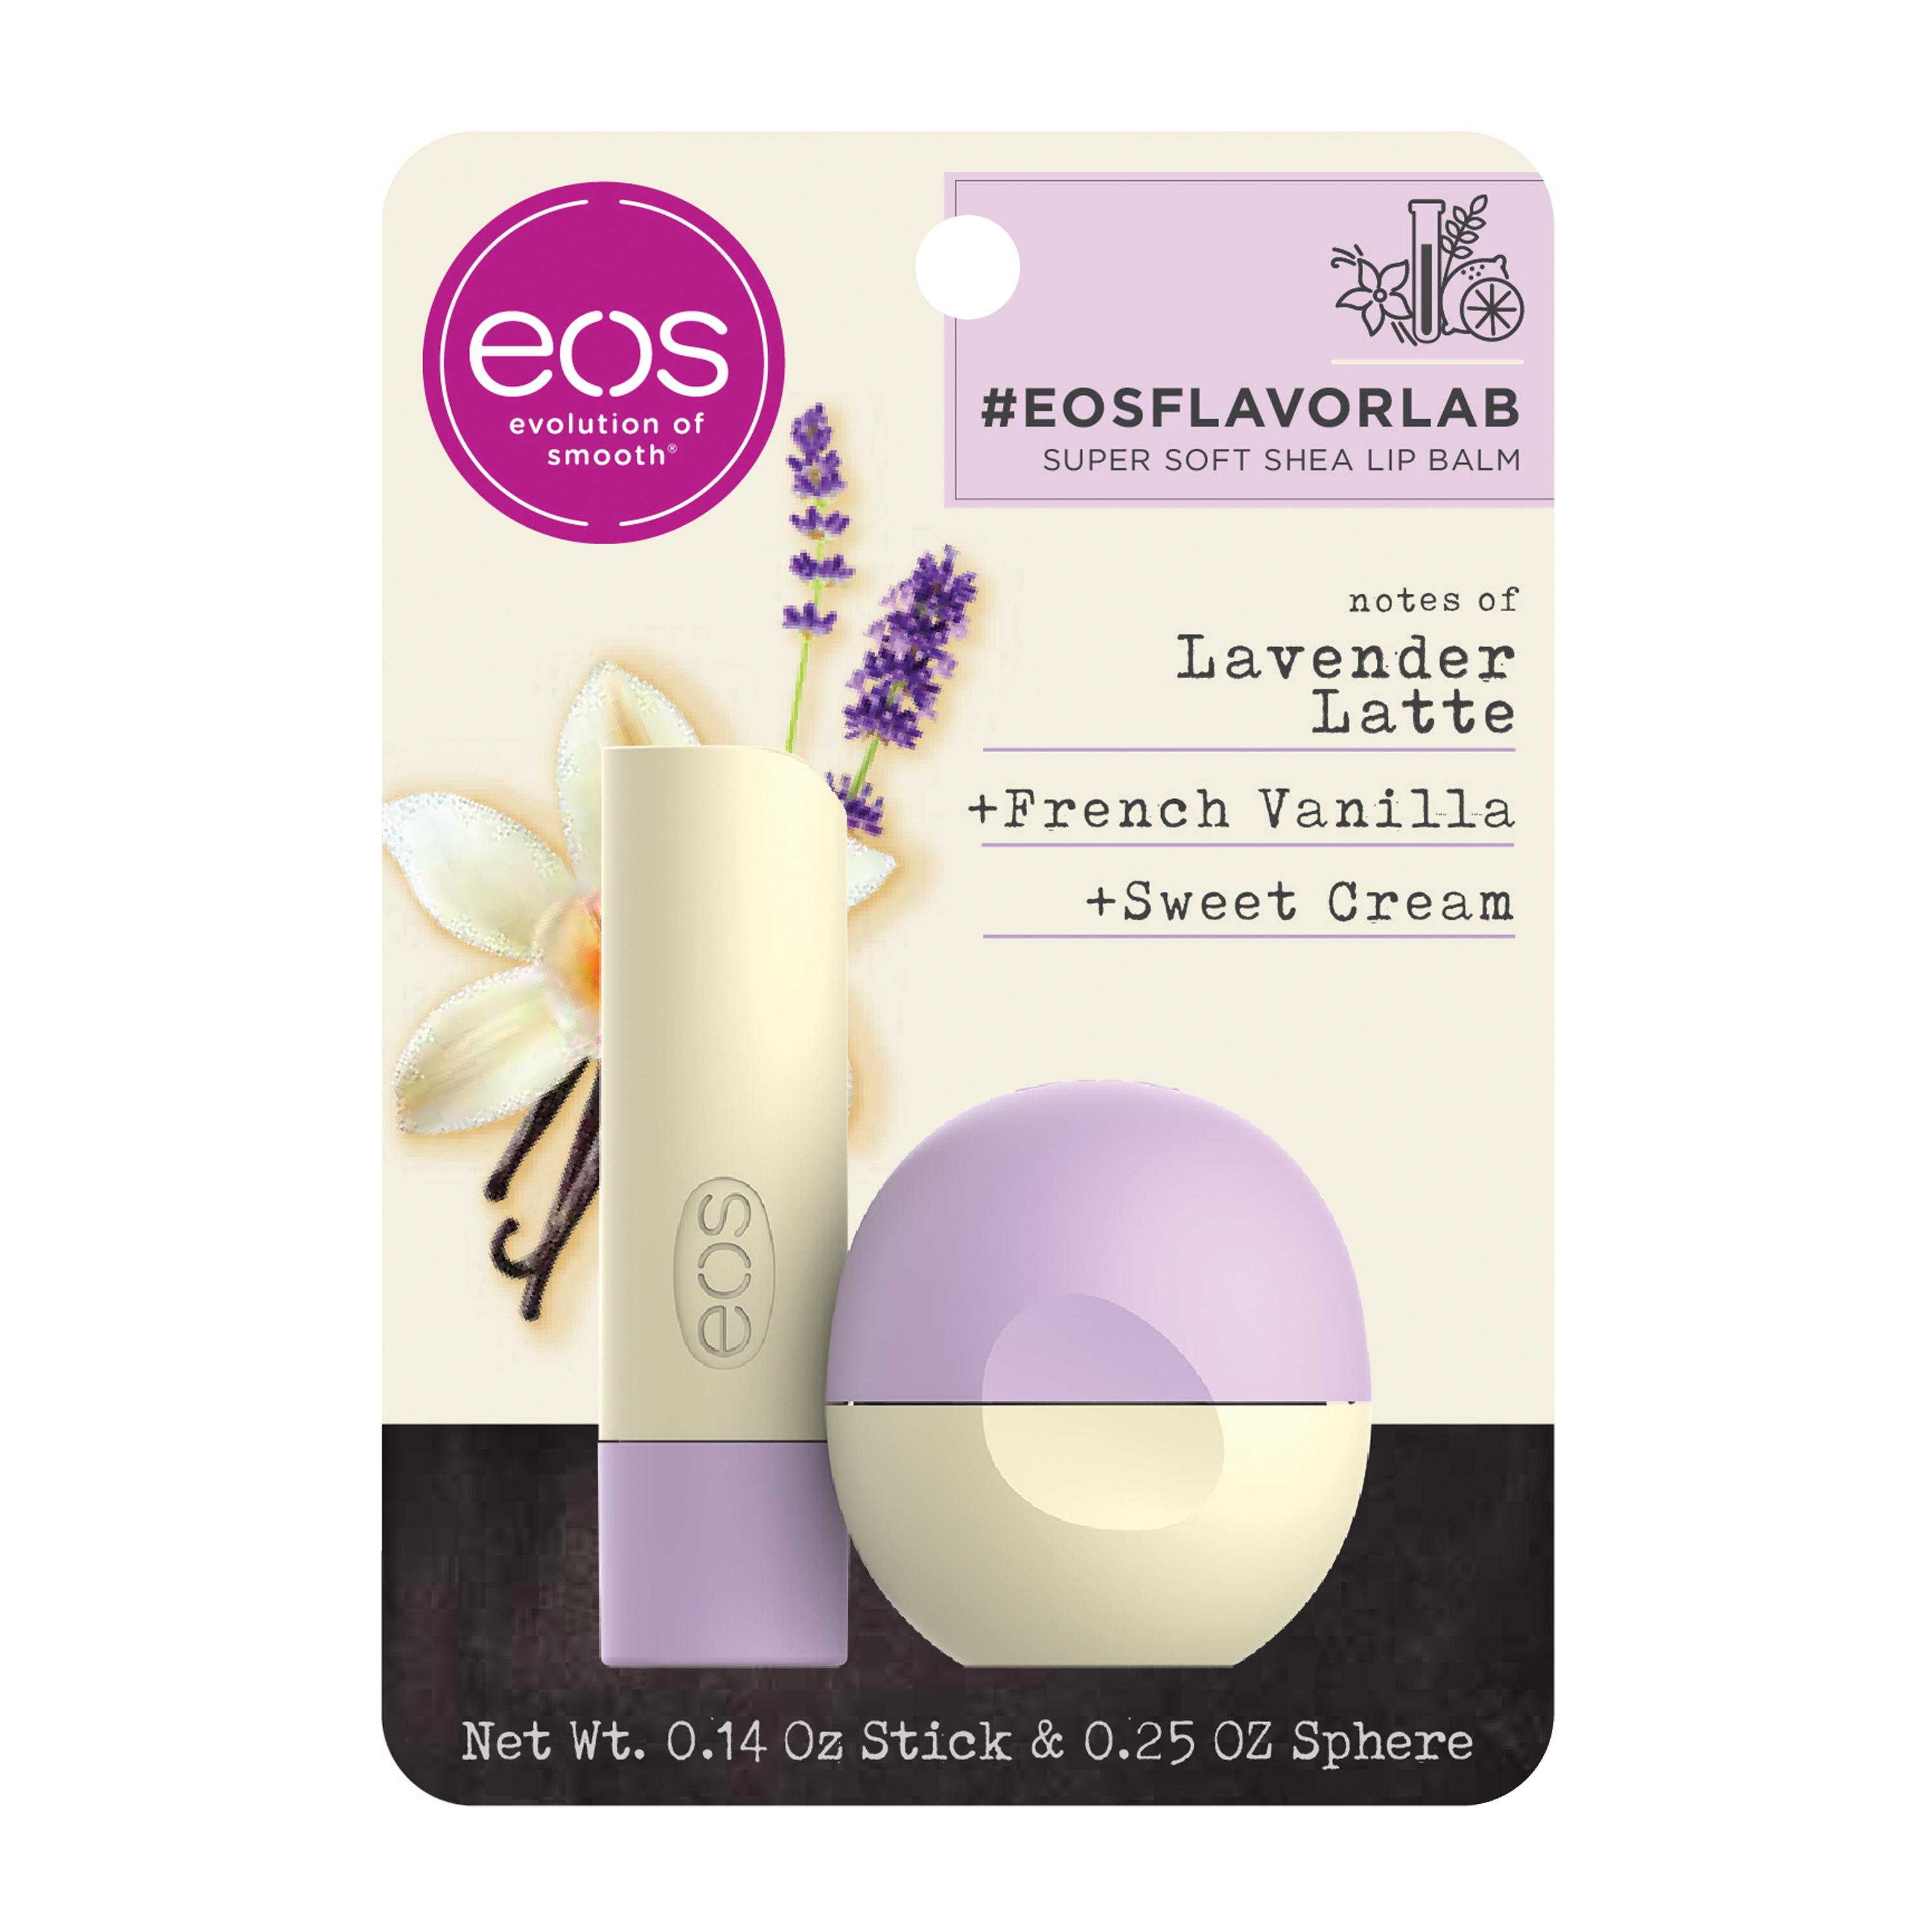 eos flavorlab Stick & Sphere Lip Balm - Lavender Latte , Moisuturzing Shea Butter for Chapped Lips , 0.39 oz , 2 count - image 1 of 4